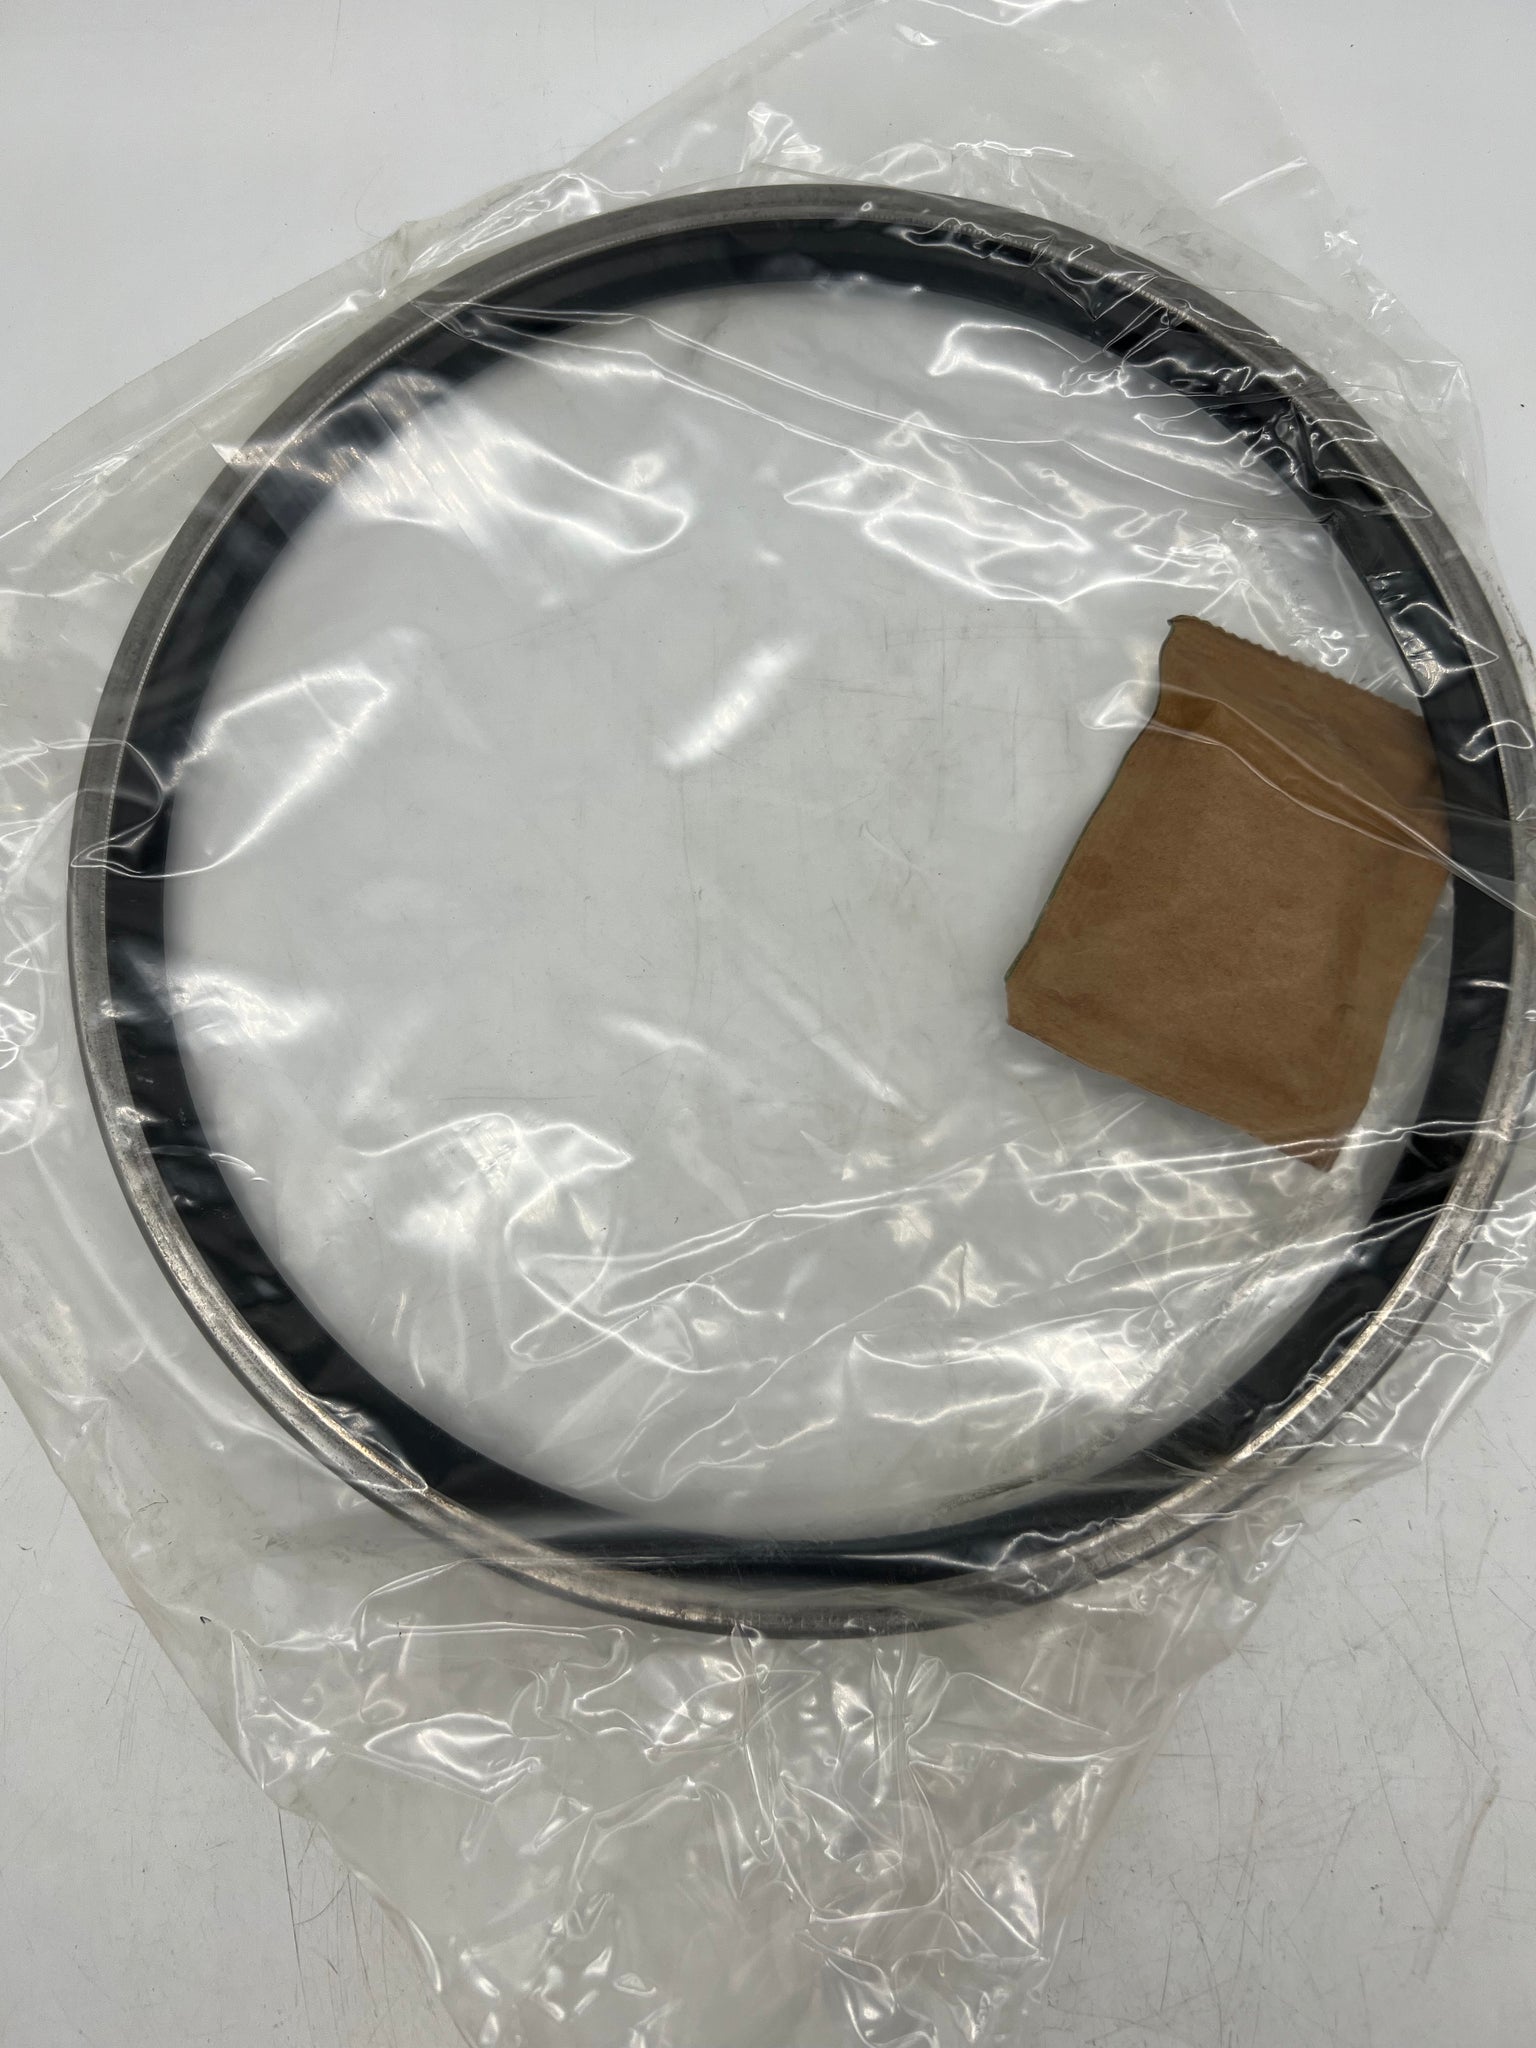 Radial Shaft Seal Oil Seal 85*105*13 / 85 X 105 X 13 mm Dfs Oil Seal 740007  - China 85*105*13, Radial Shaft Seal Oil Seal | Made-in-China.com